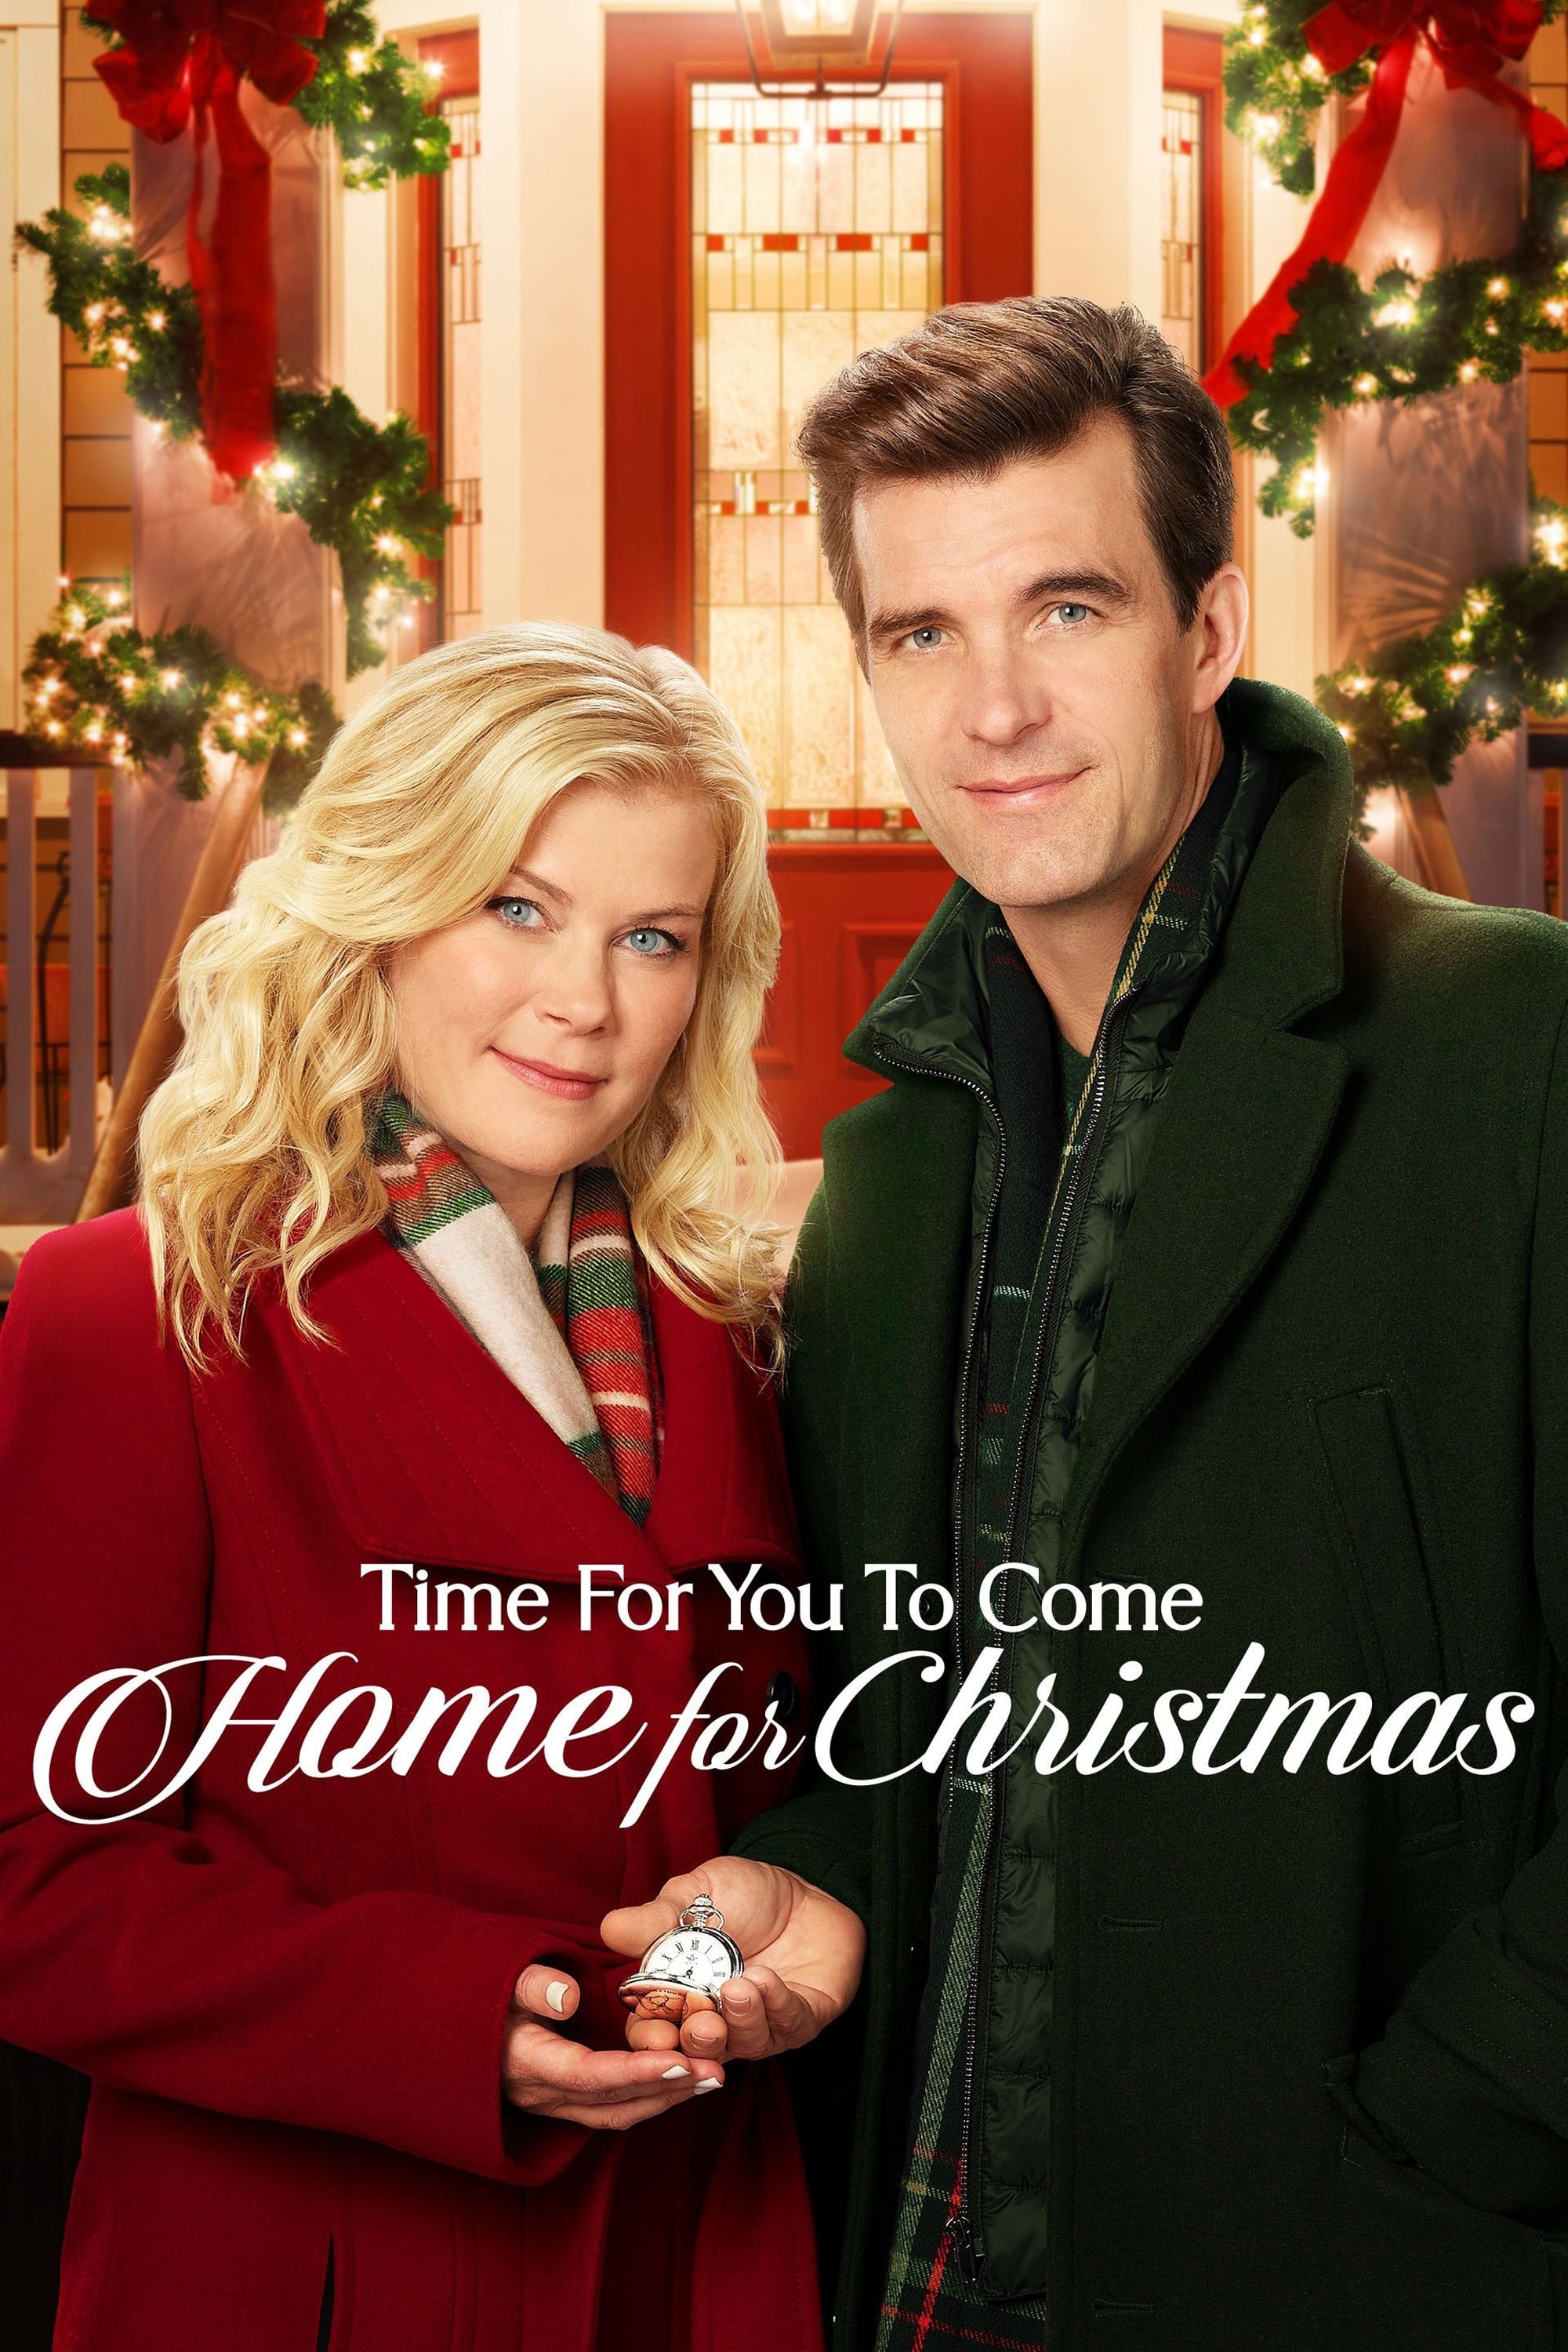 Time for You to Come Home for Christmas film